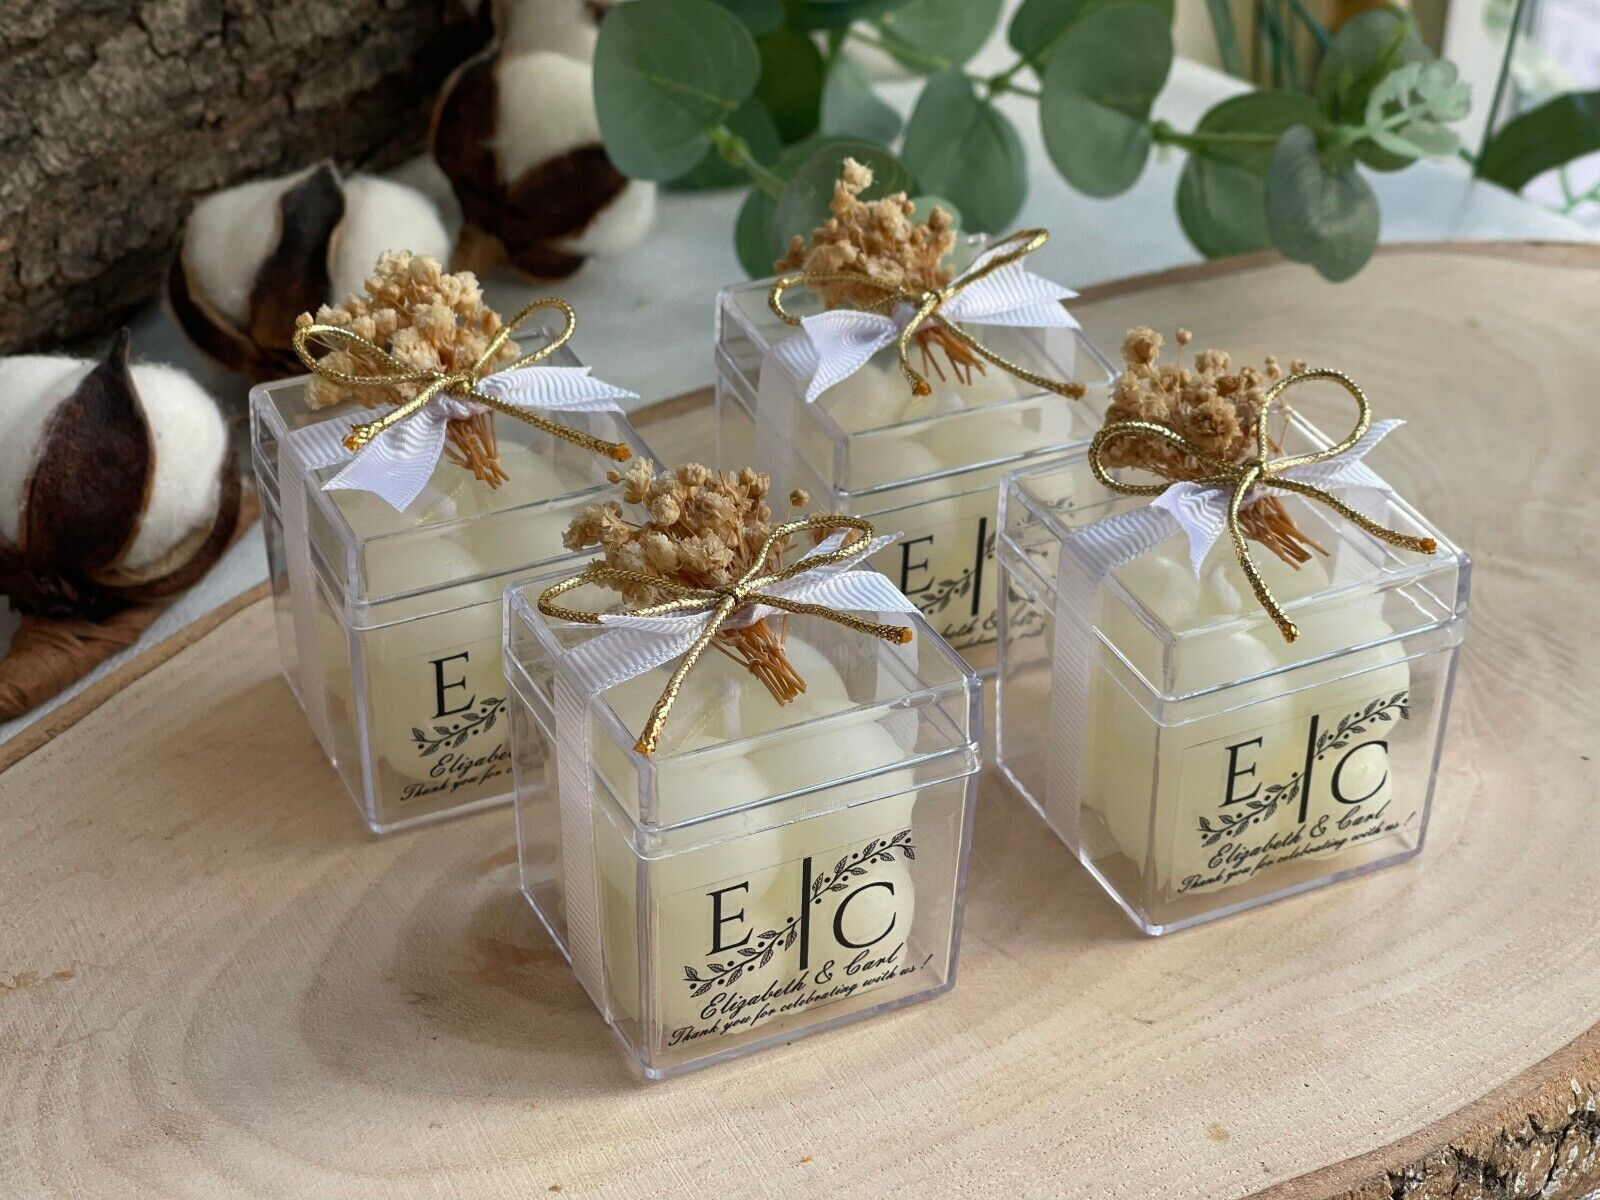 Personalized Candles (eBay.ca)